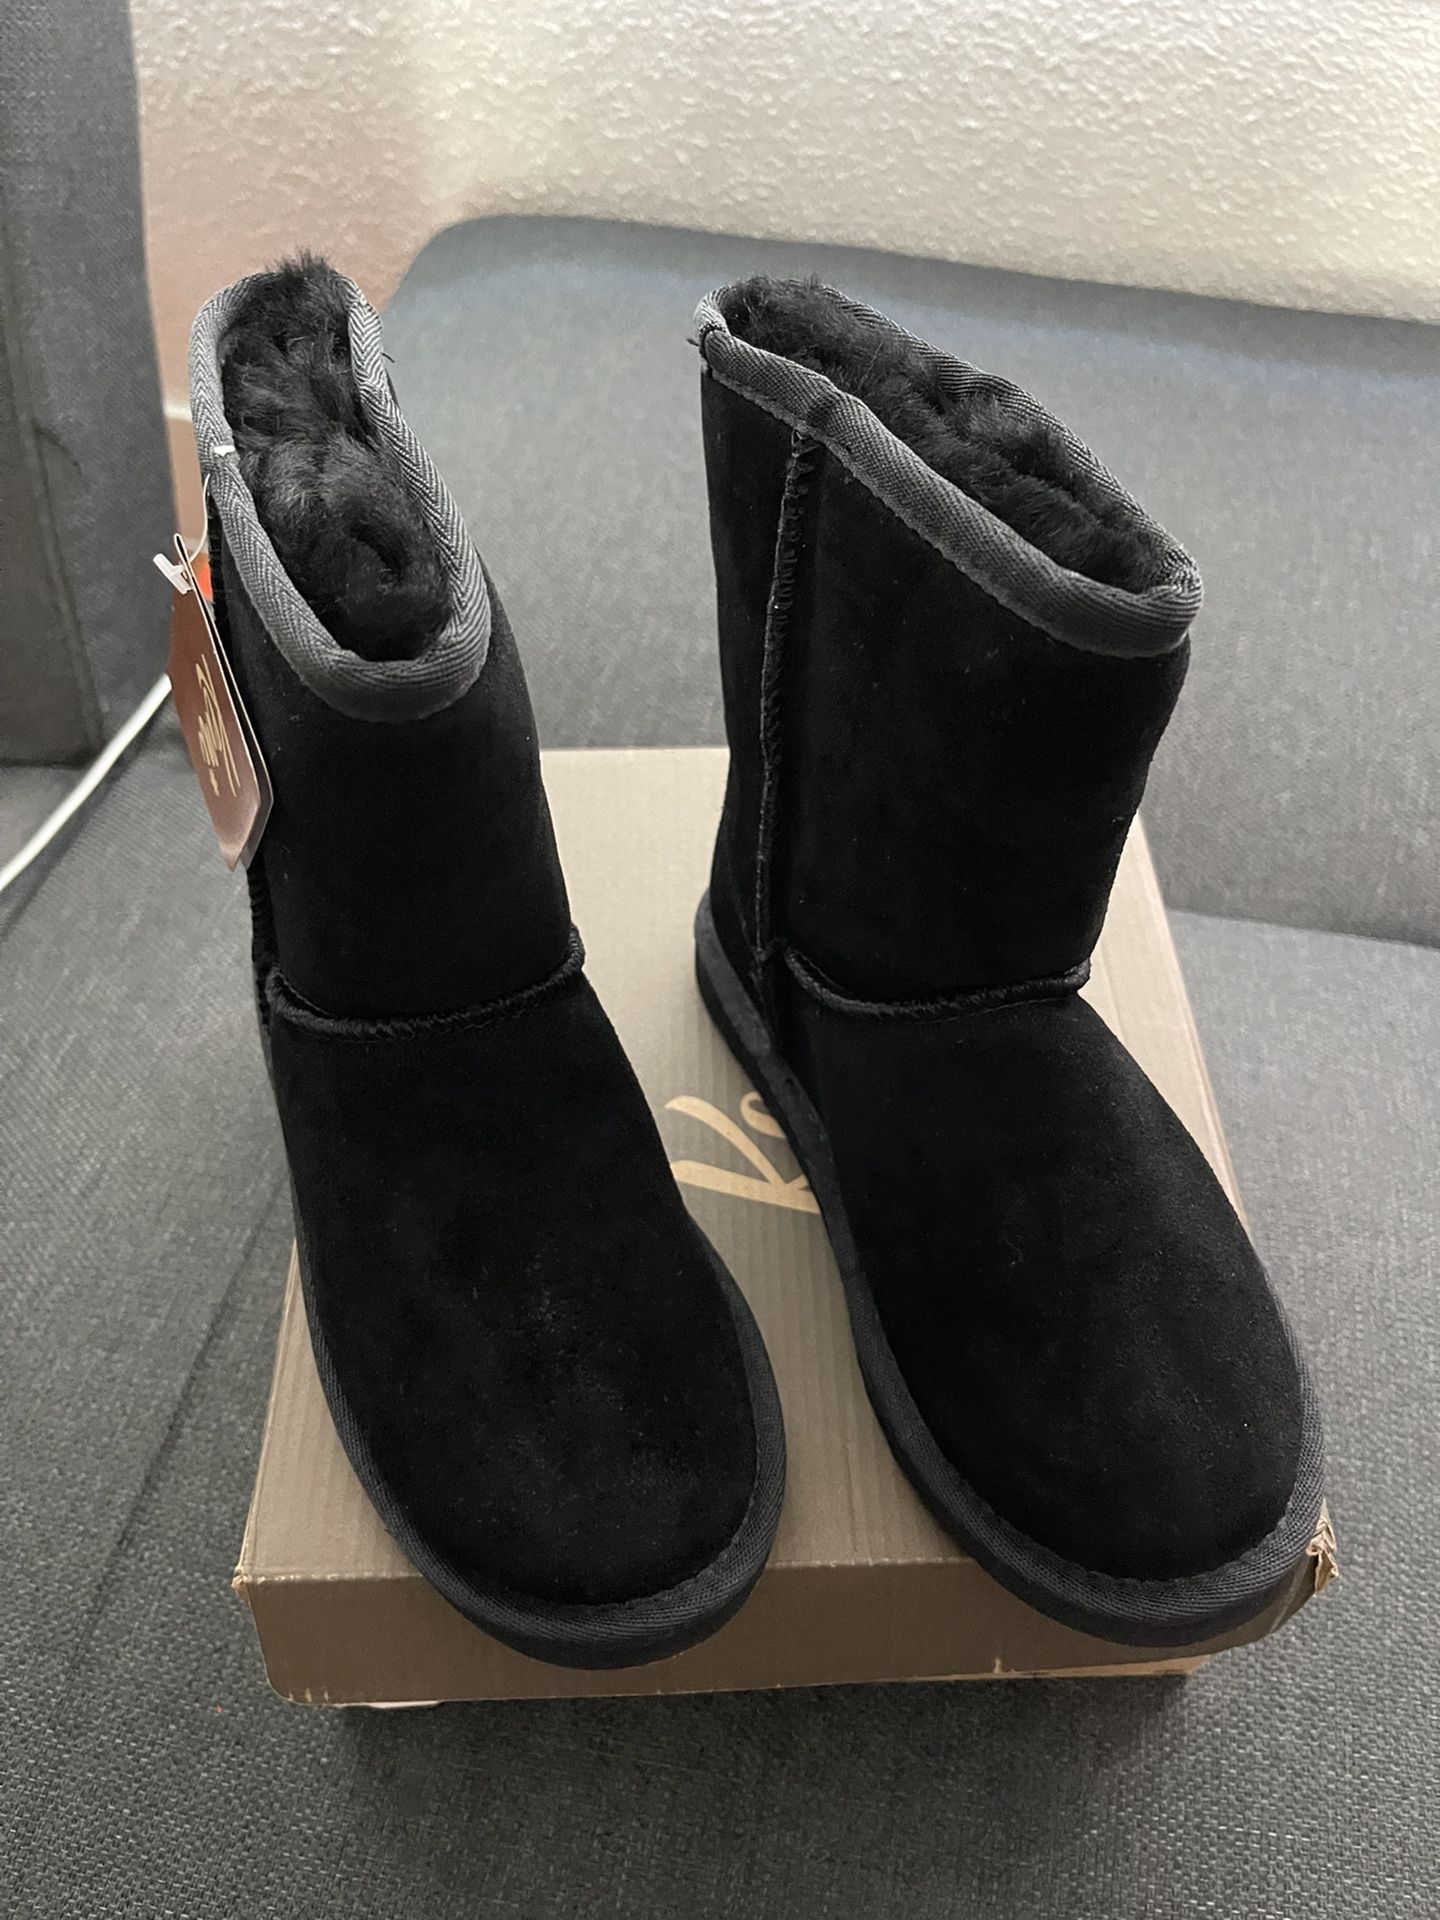 Womens Kemi Size 8 Boots UGGS STYLED NOT UGGS